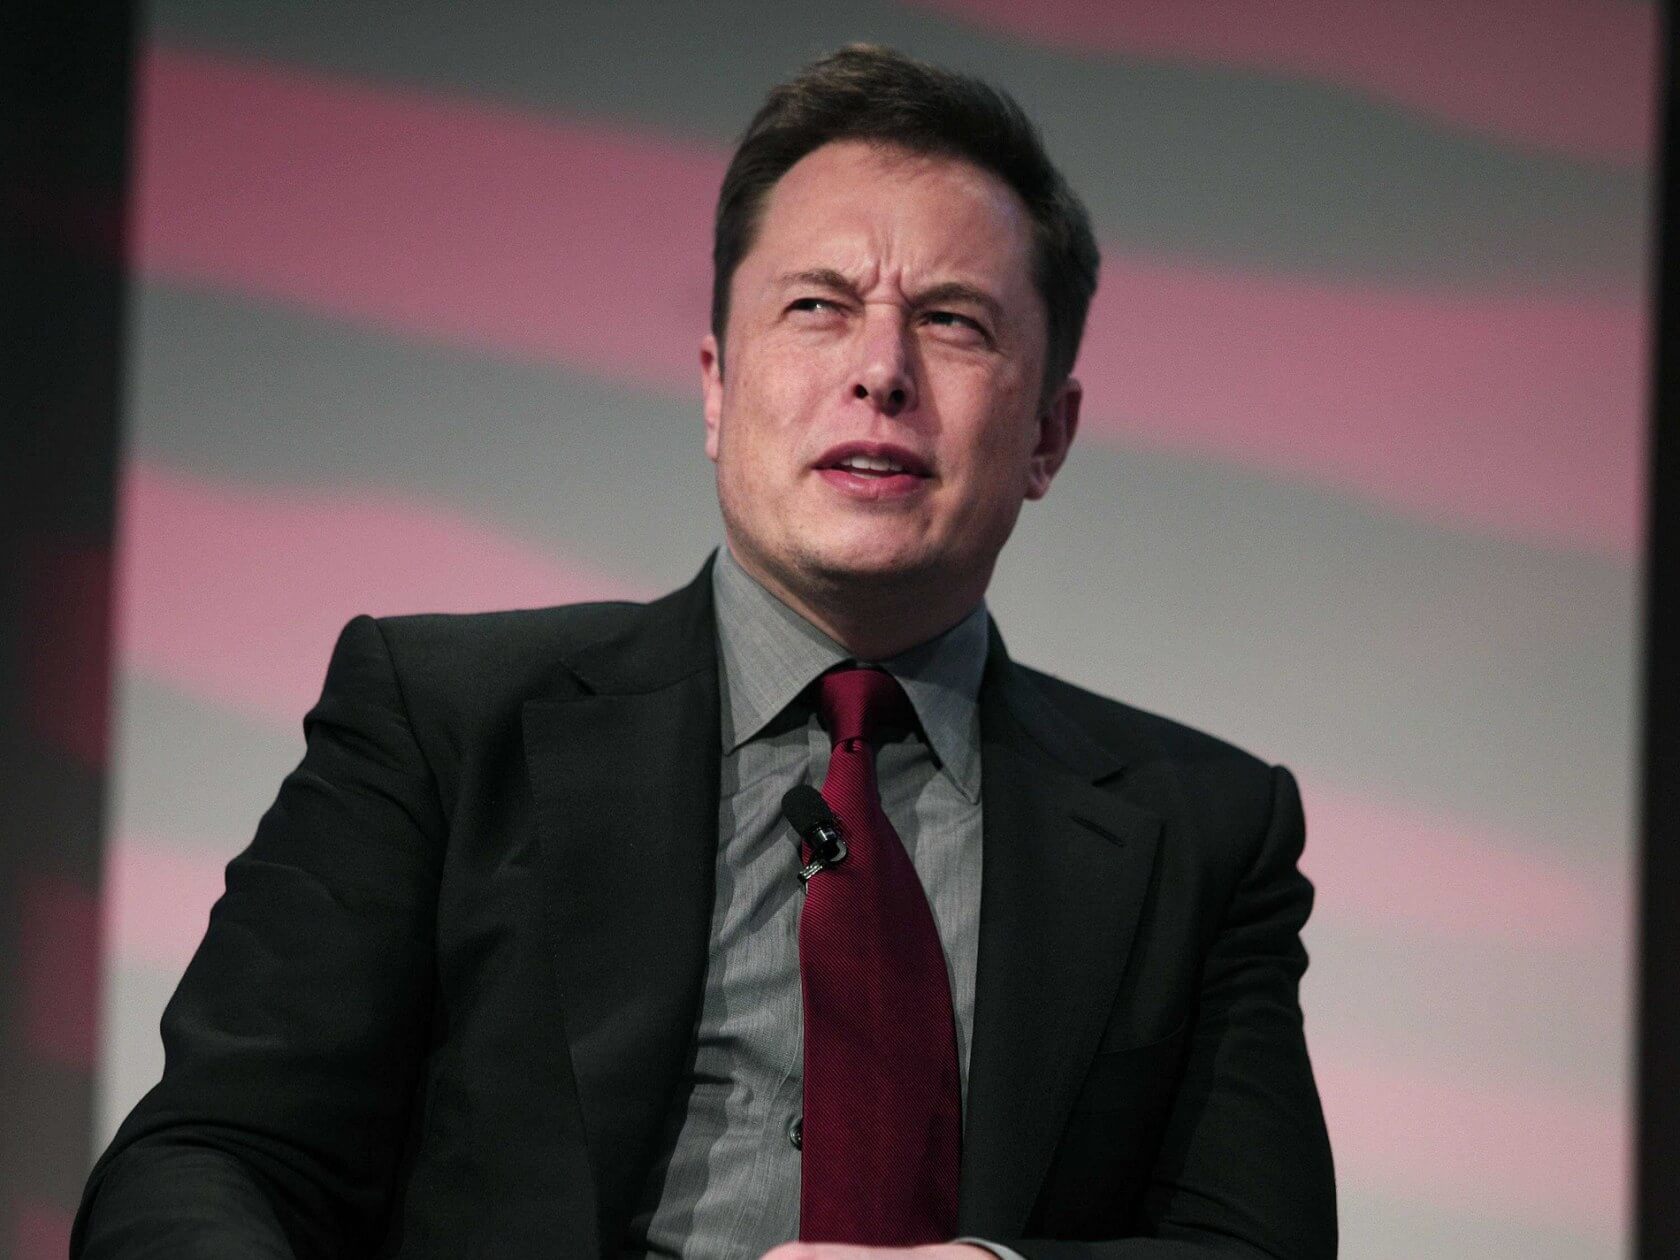 Elon Musk opens Tesla factory in defiance of local orders, says he's prepared to be arrested